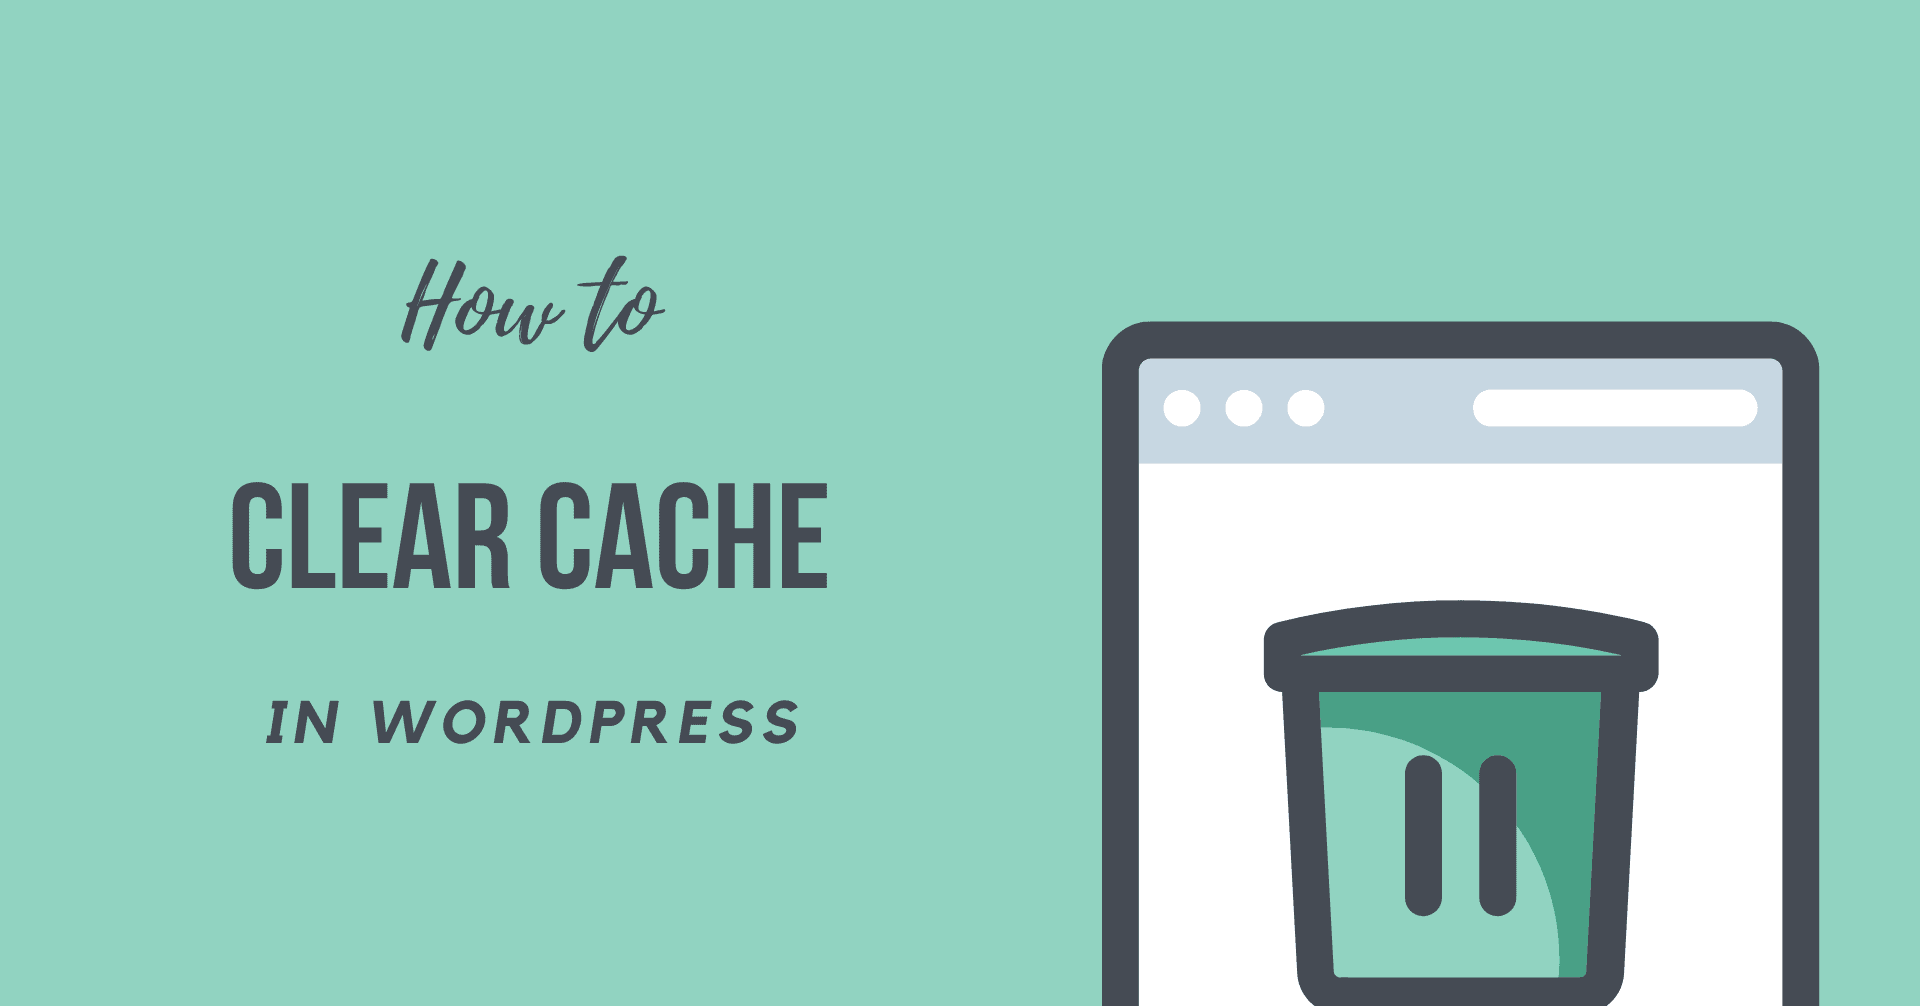 How to Clear Cache in WordPress